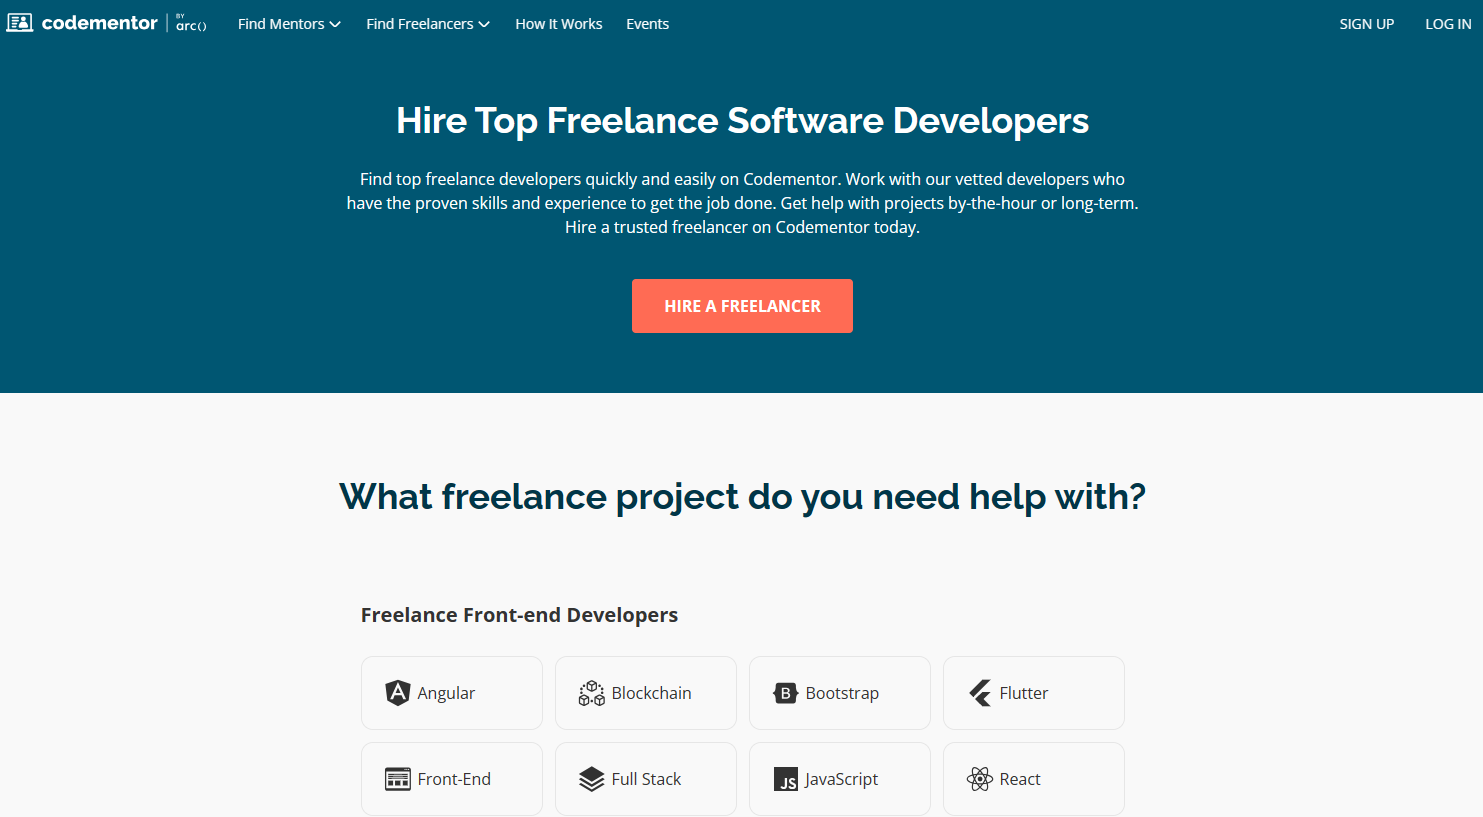 Codementor - Hire the Best Freelance Developers